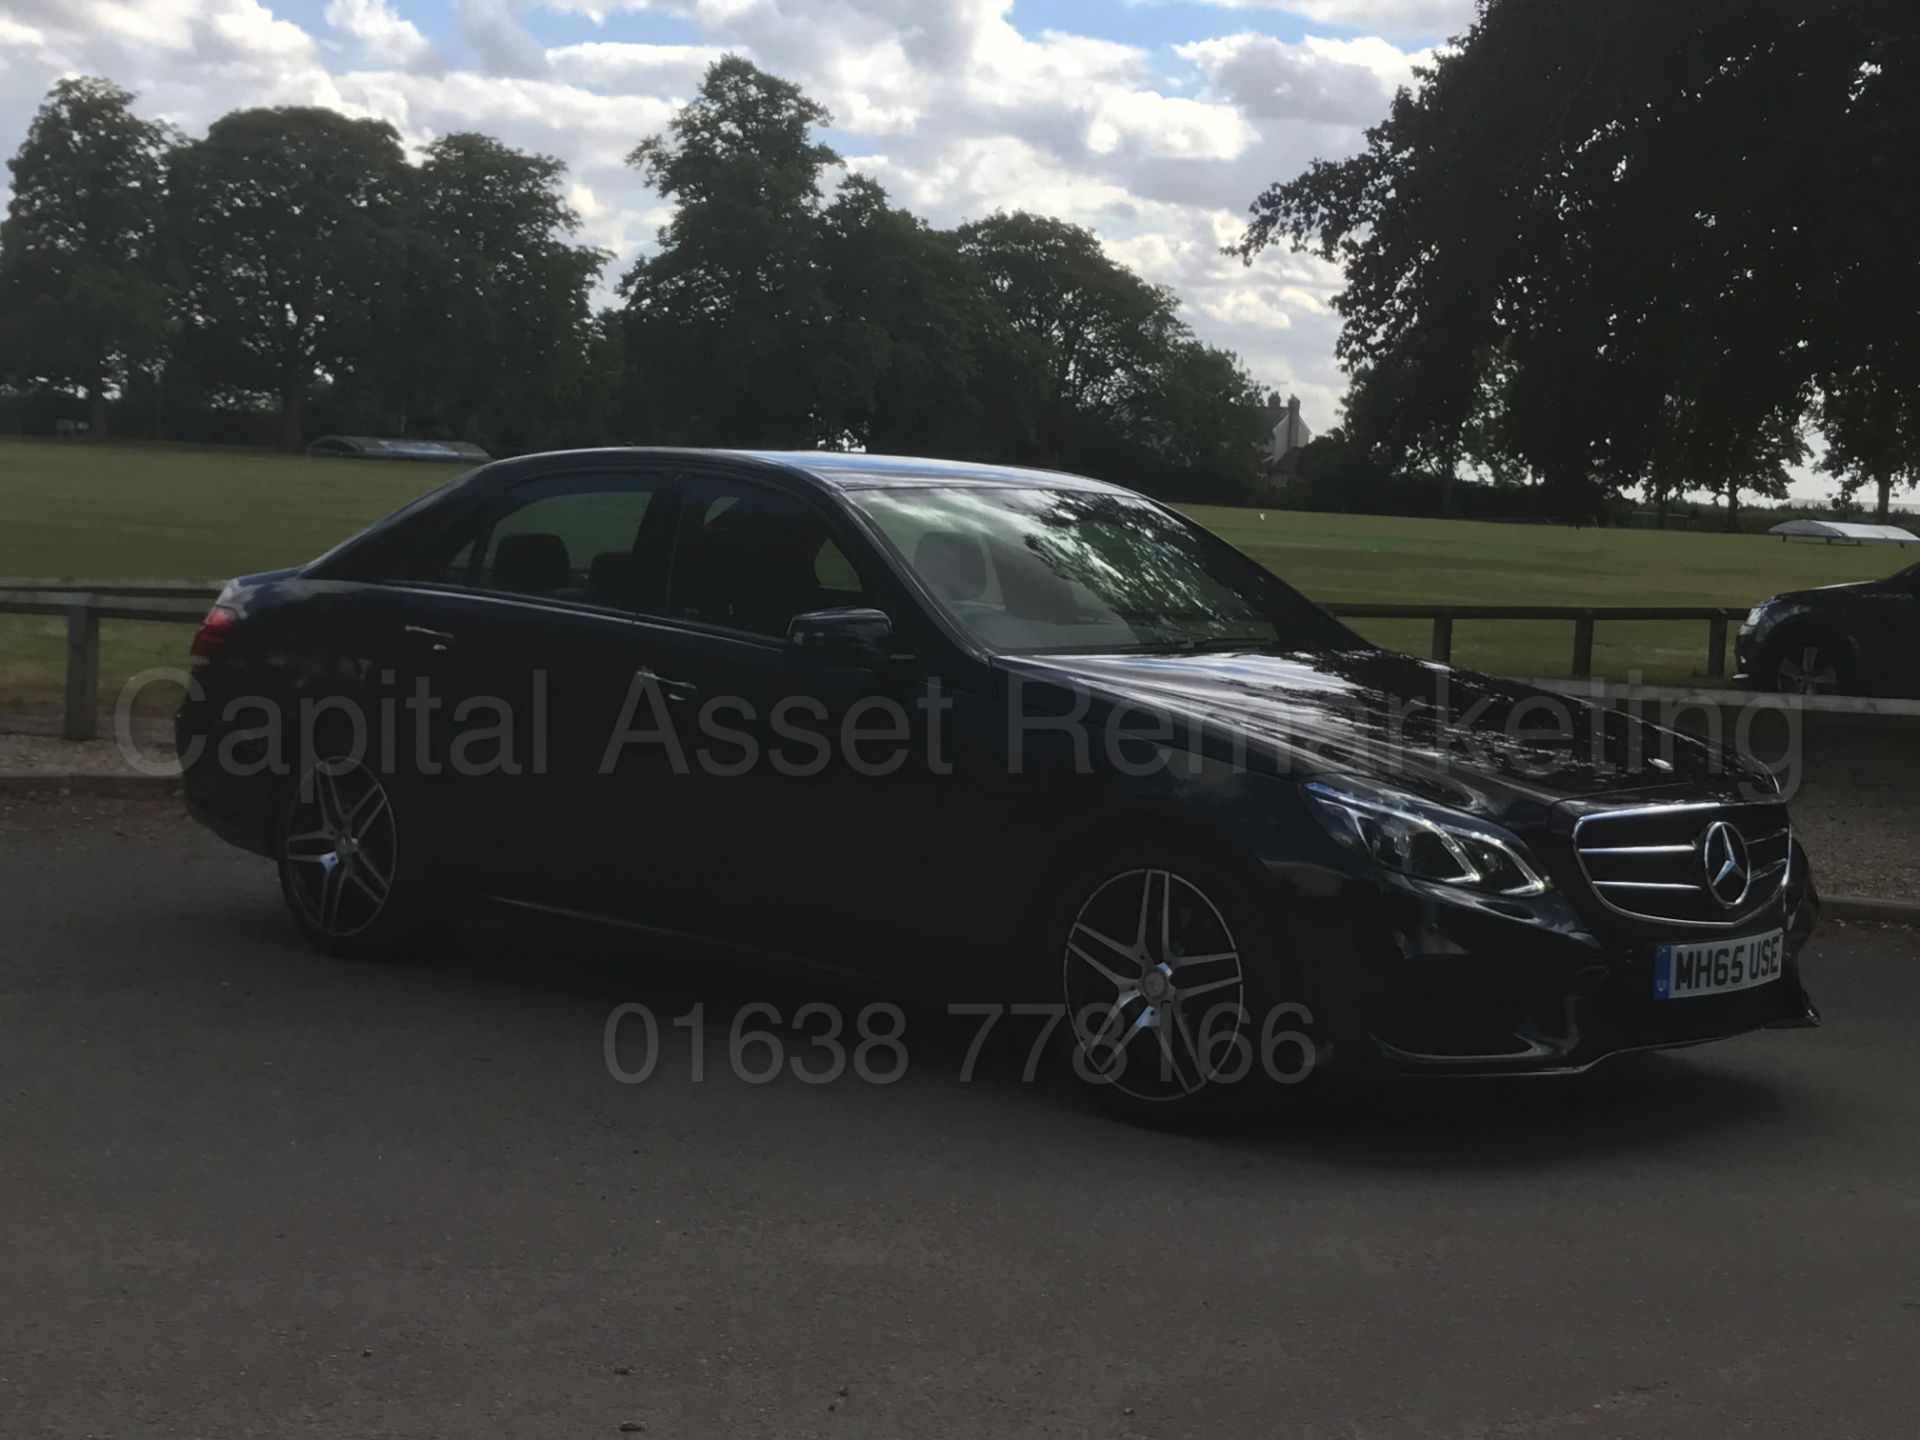 MERCEDES-BENZ E220D *AMG - NIGHT EDITION* SALOON (2016) '7G AUTO - LEATHER - SAT NAV' *LOW MILES* - Image 10 of 43